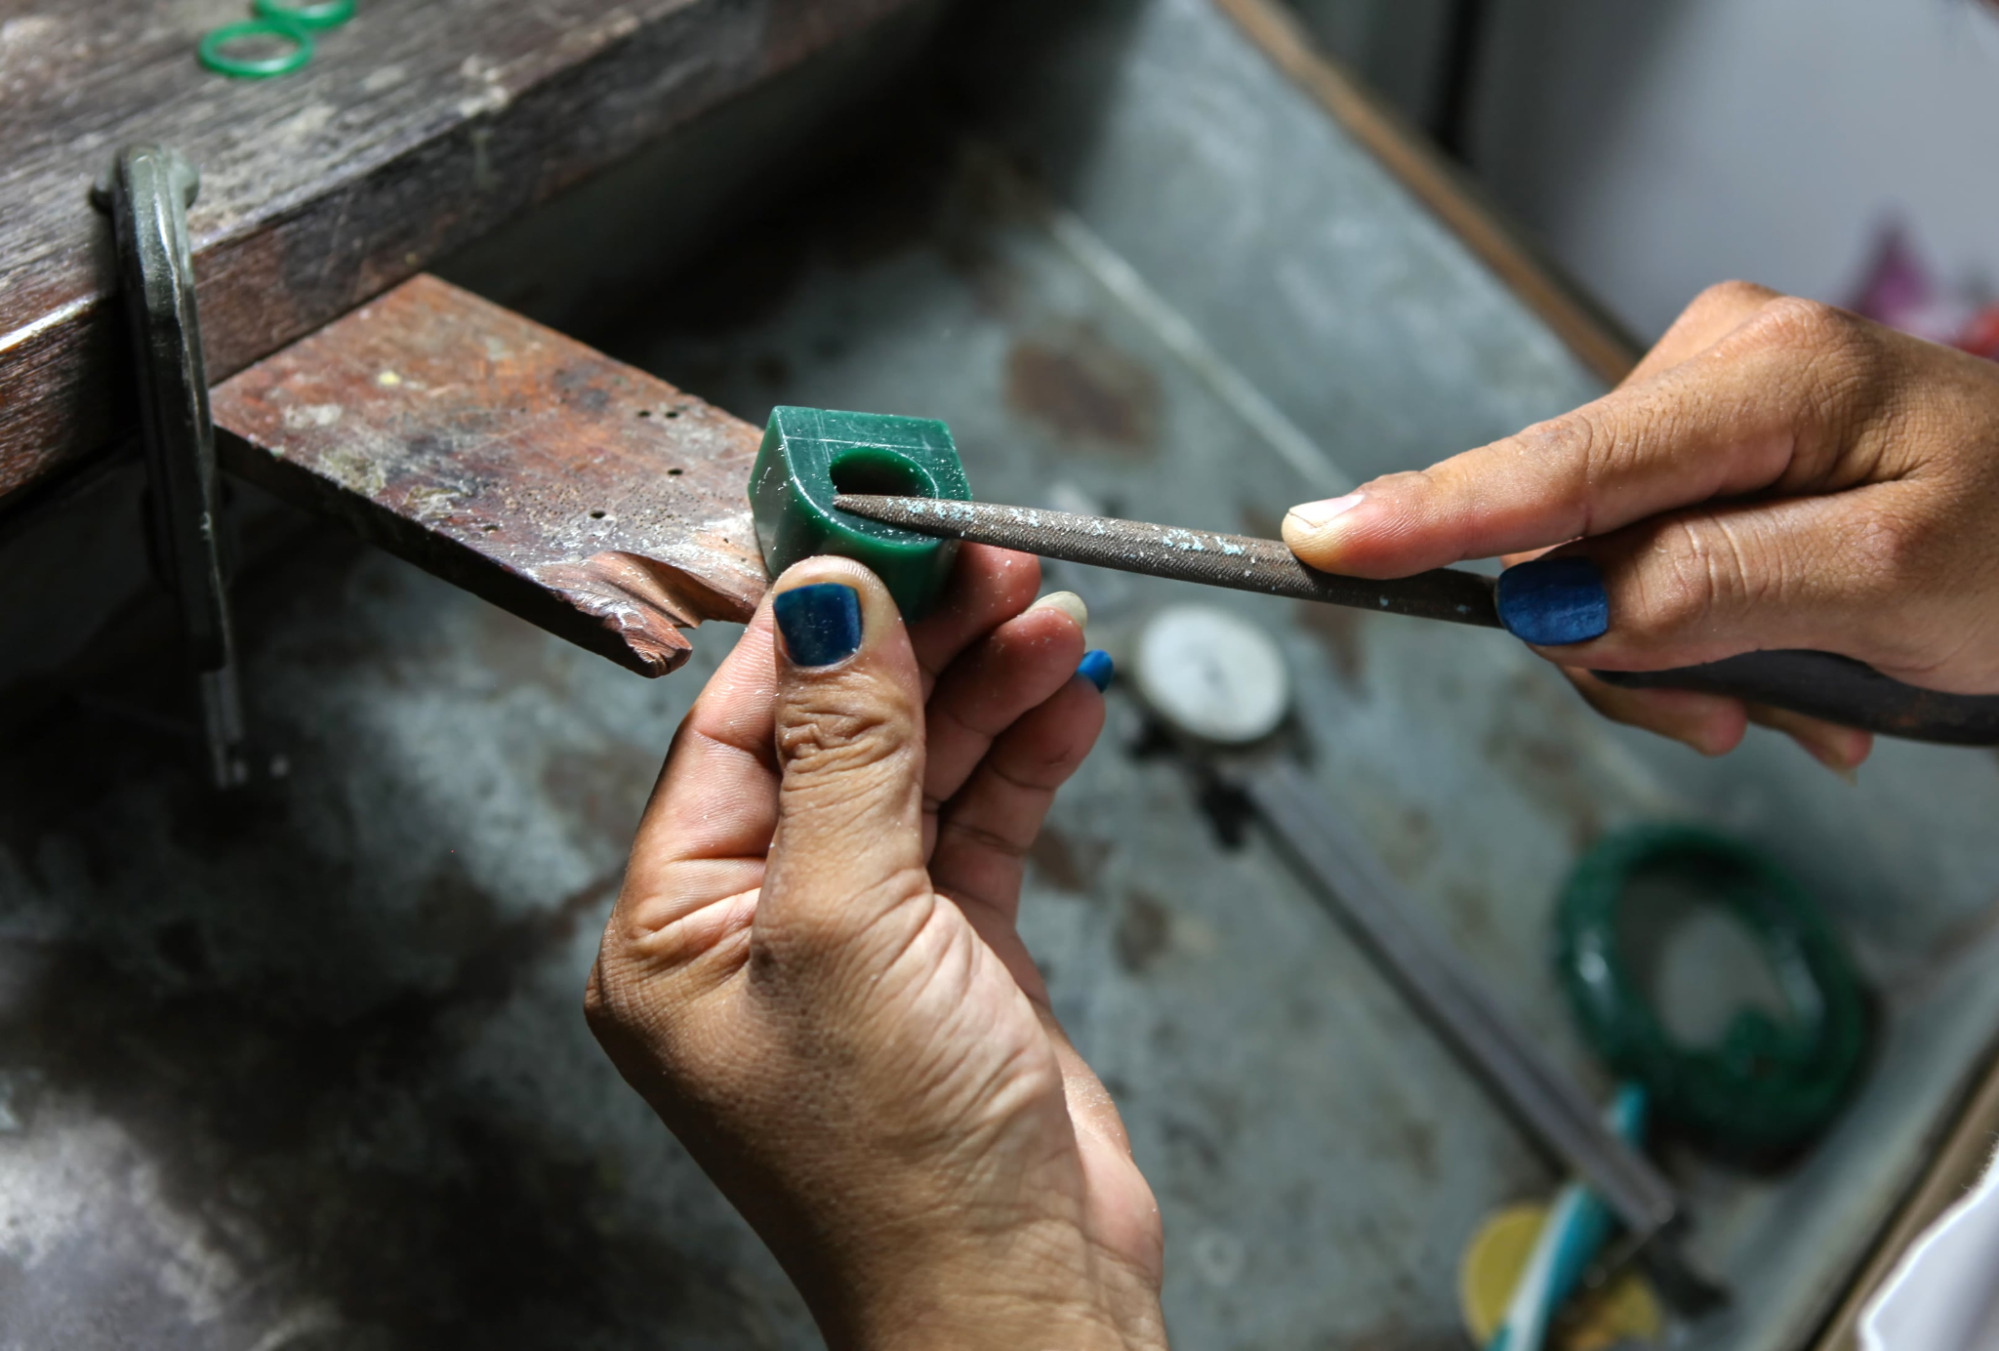 A jeweler shapes a piece of wax to make a model of a custom jewelry design